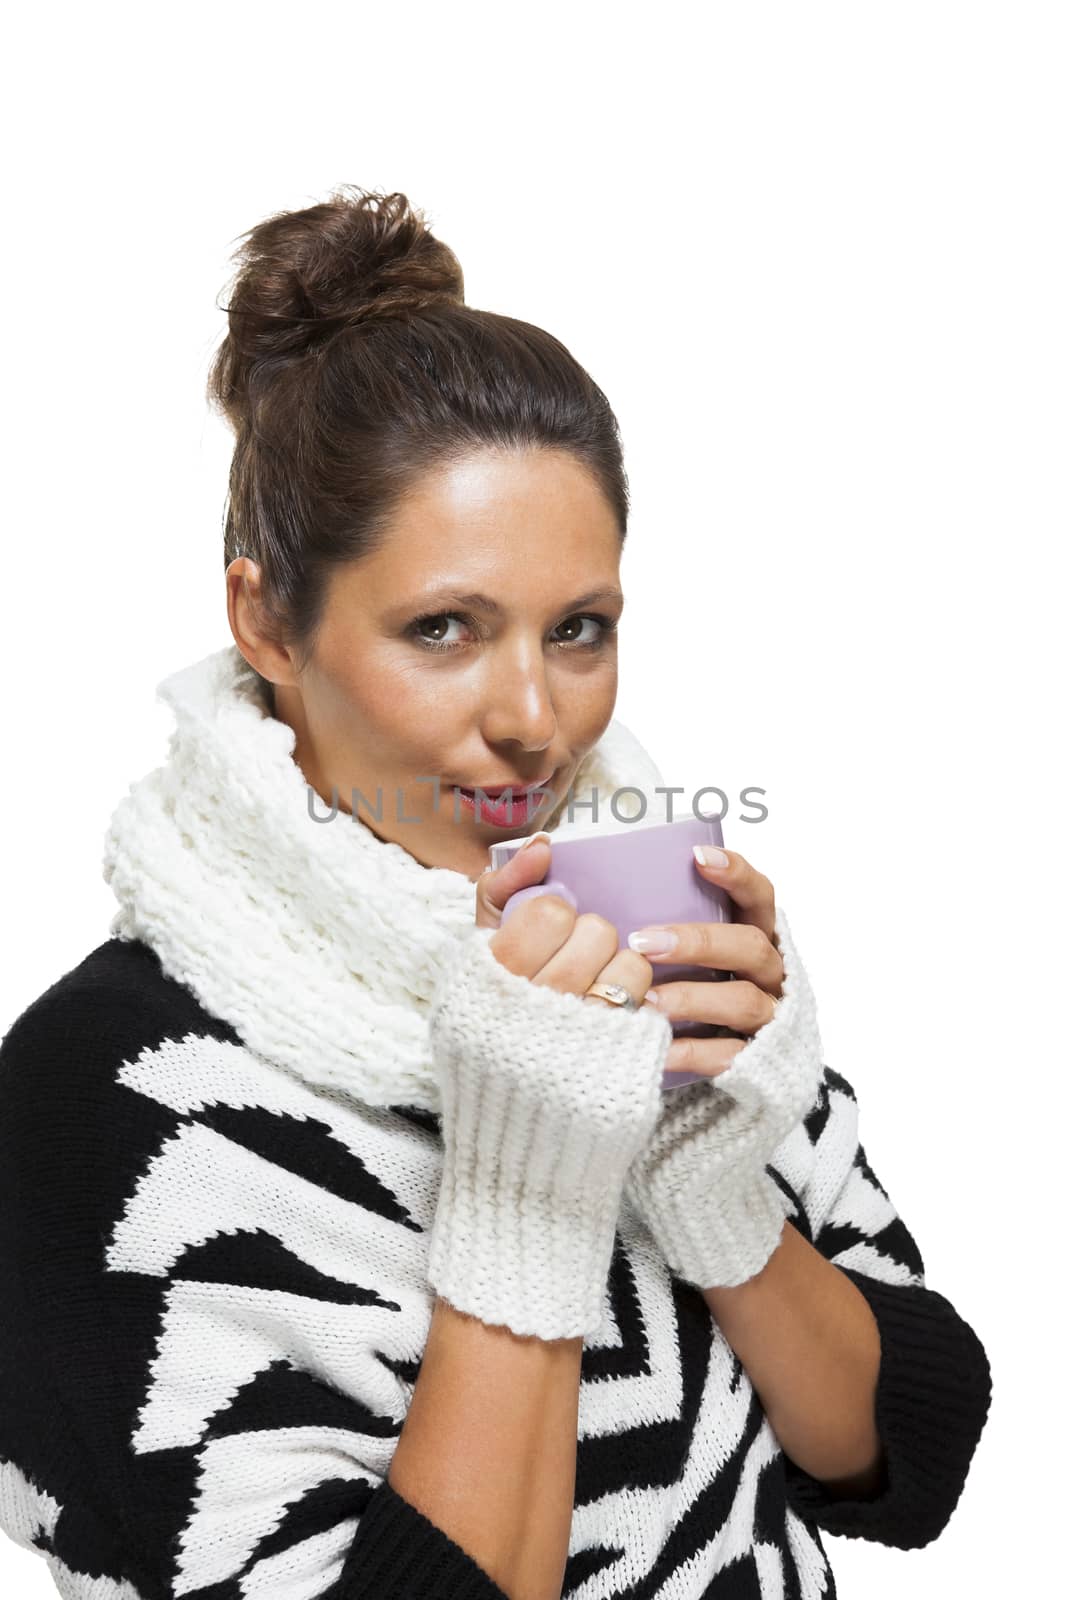 Cold attractive stylish woman in an elegant black and white winter outfit clasping a mug of hot coffee in her hands while savoring the aroma with a look of anticipation